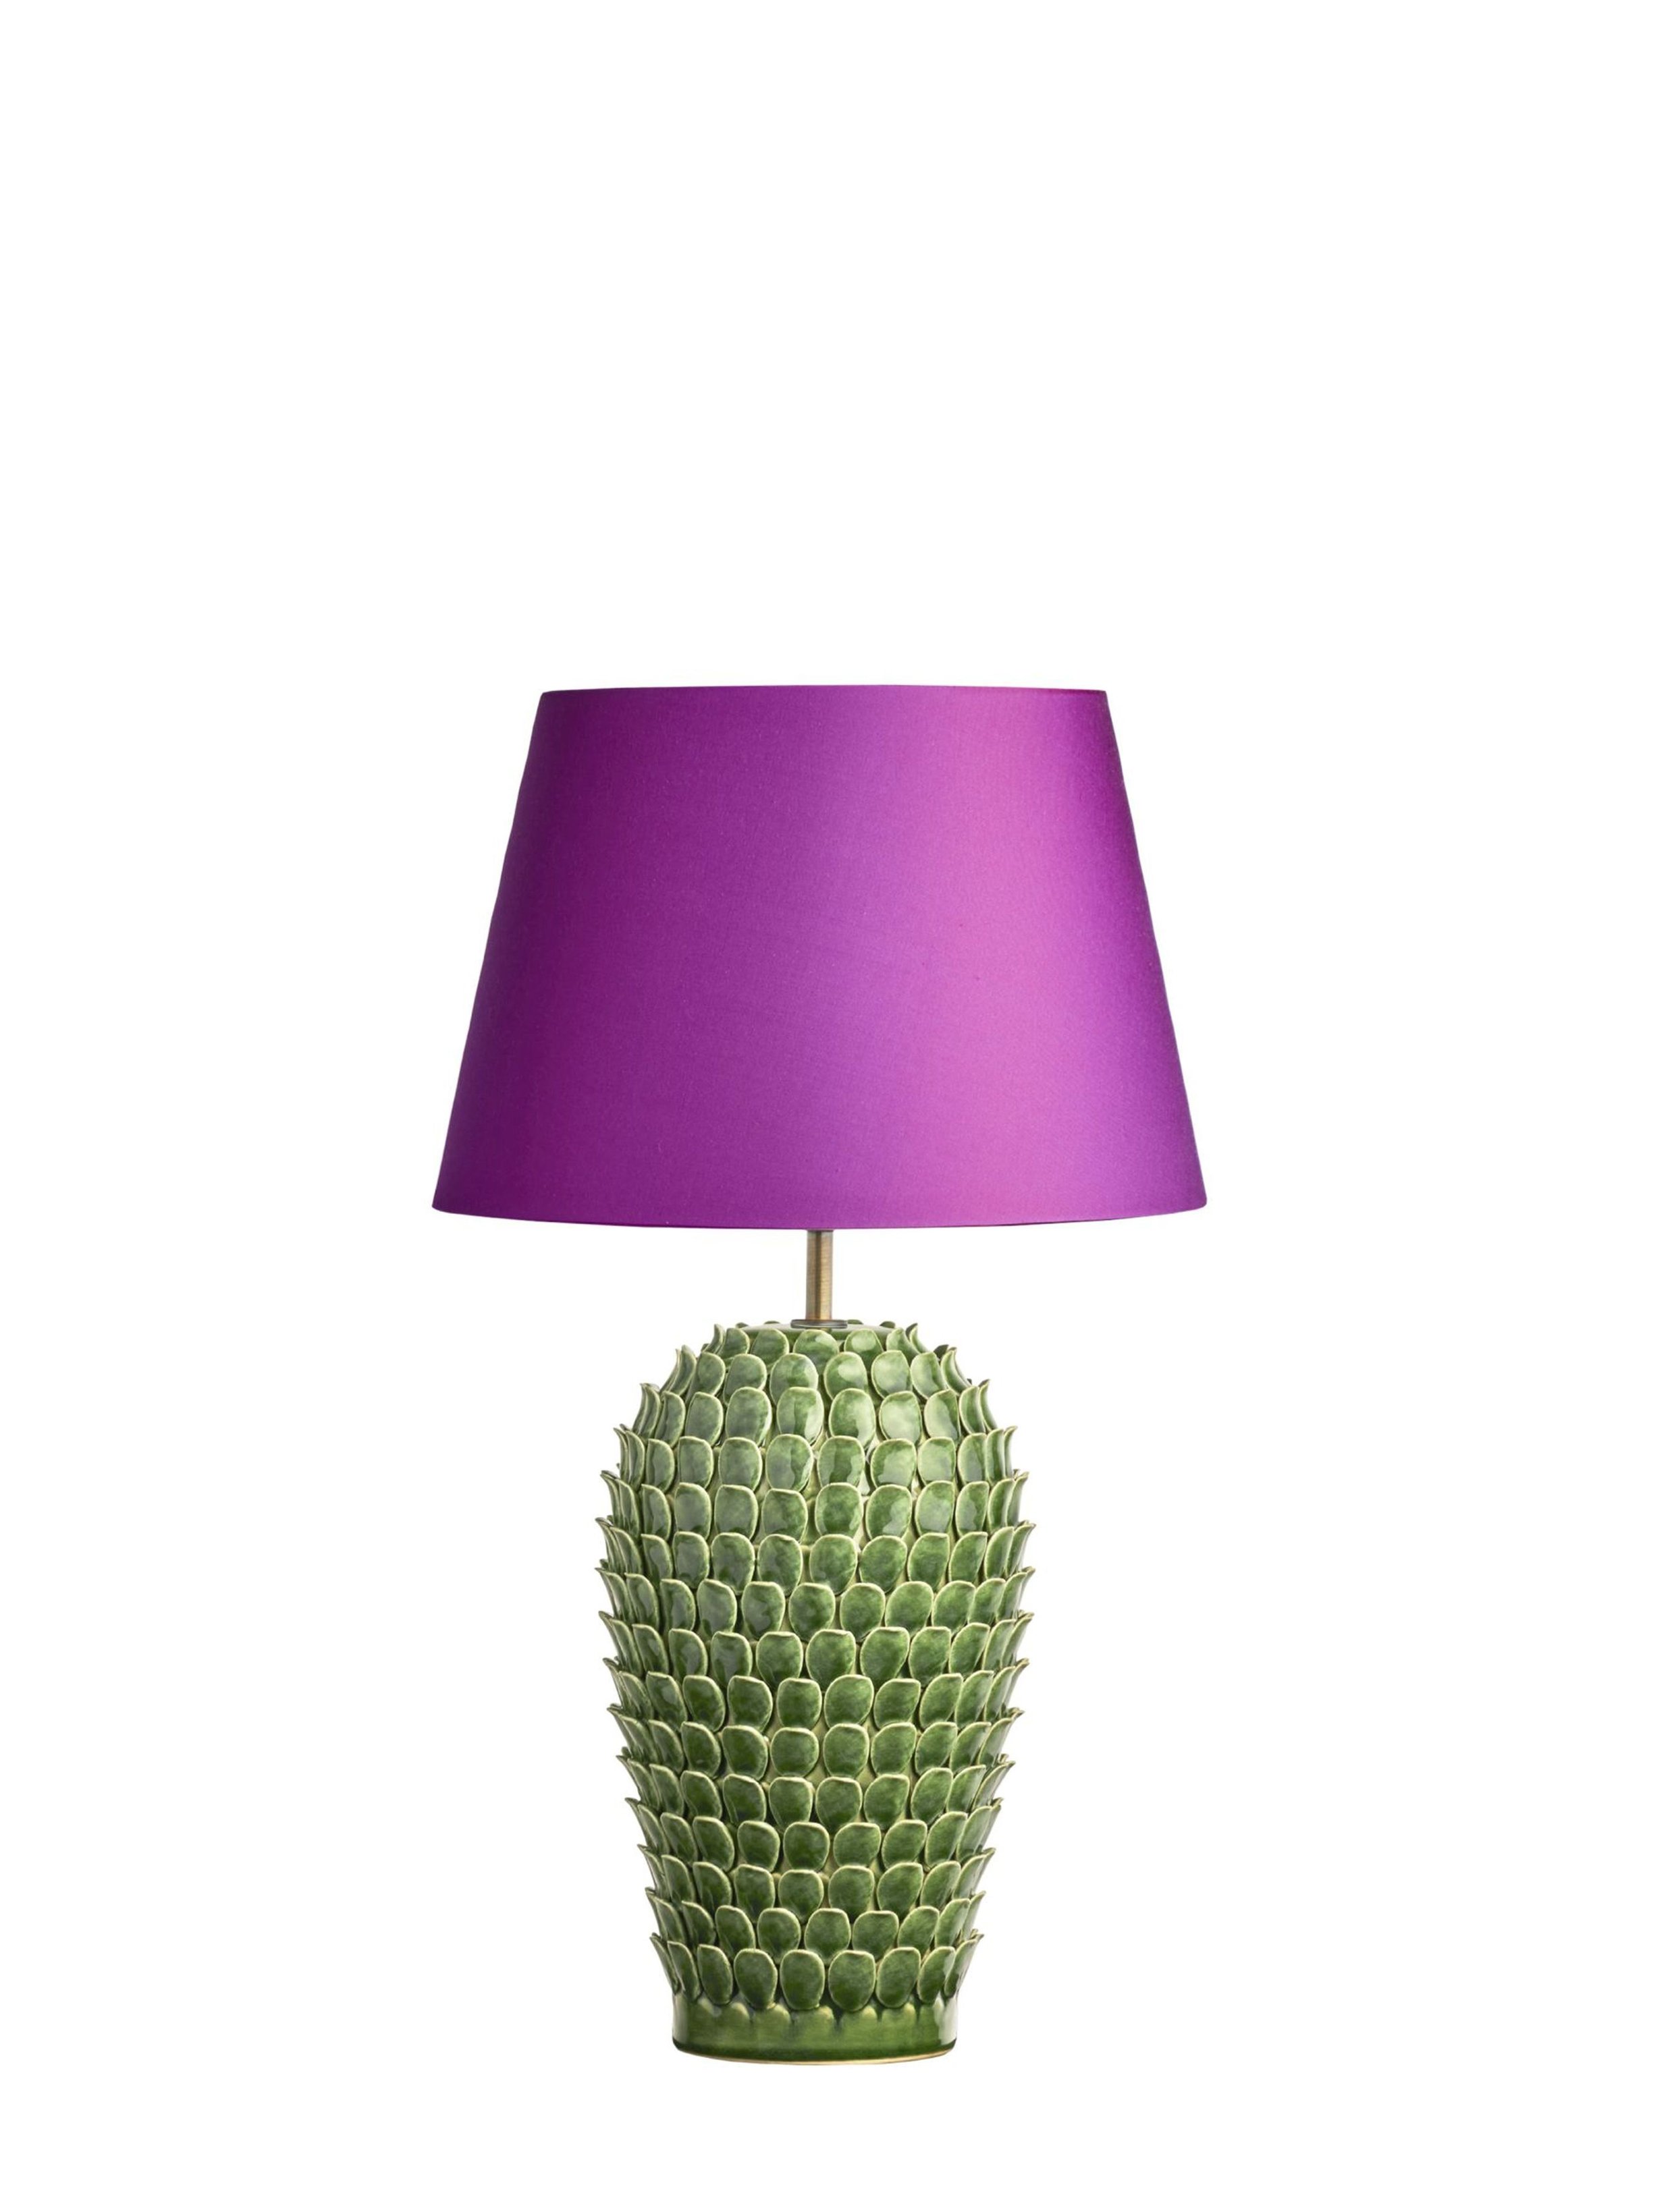  7. Pooky Straight Empire Lampshade in Fuchsia Dupion Silk €116, and Larger Stucco Table Lamp in Emerald €150, 